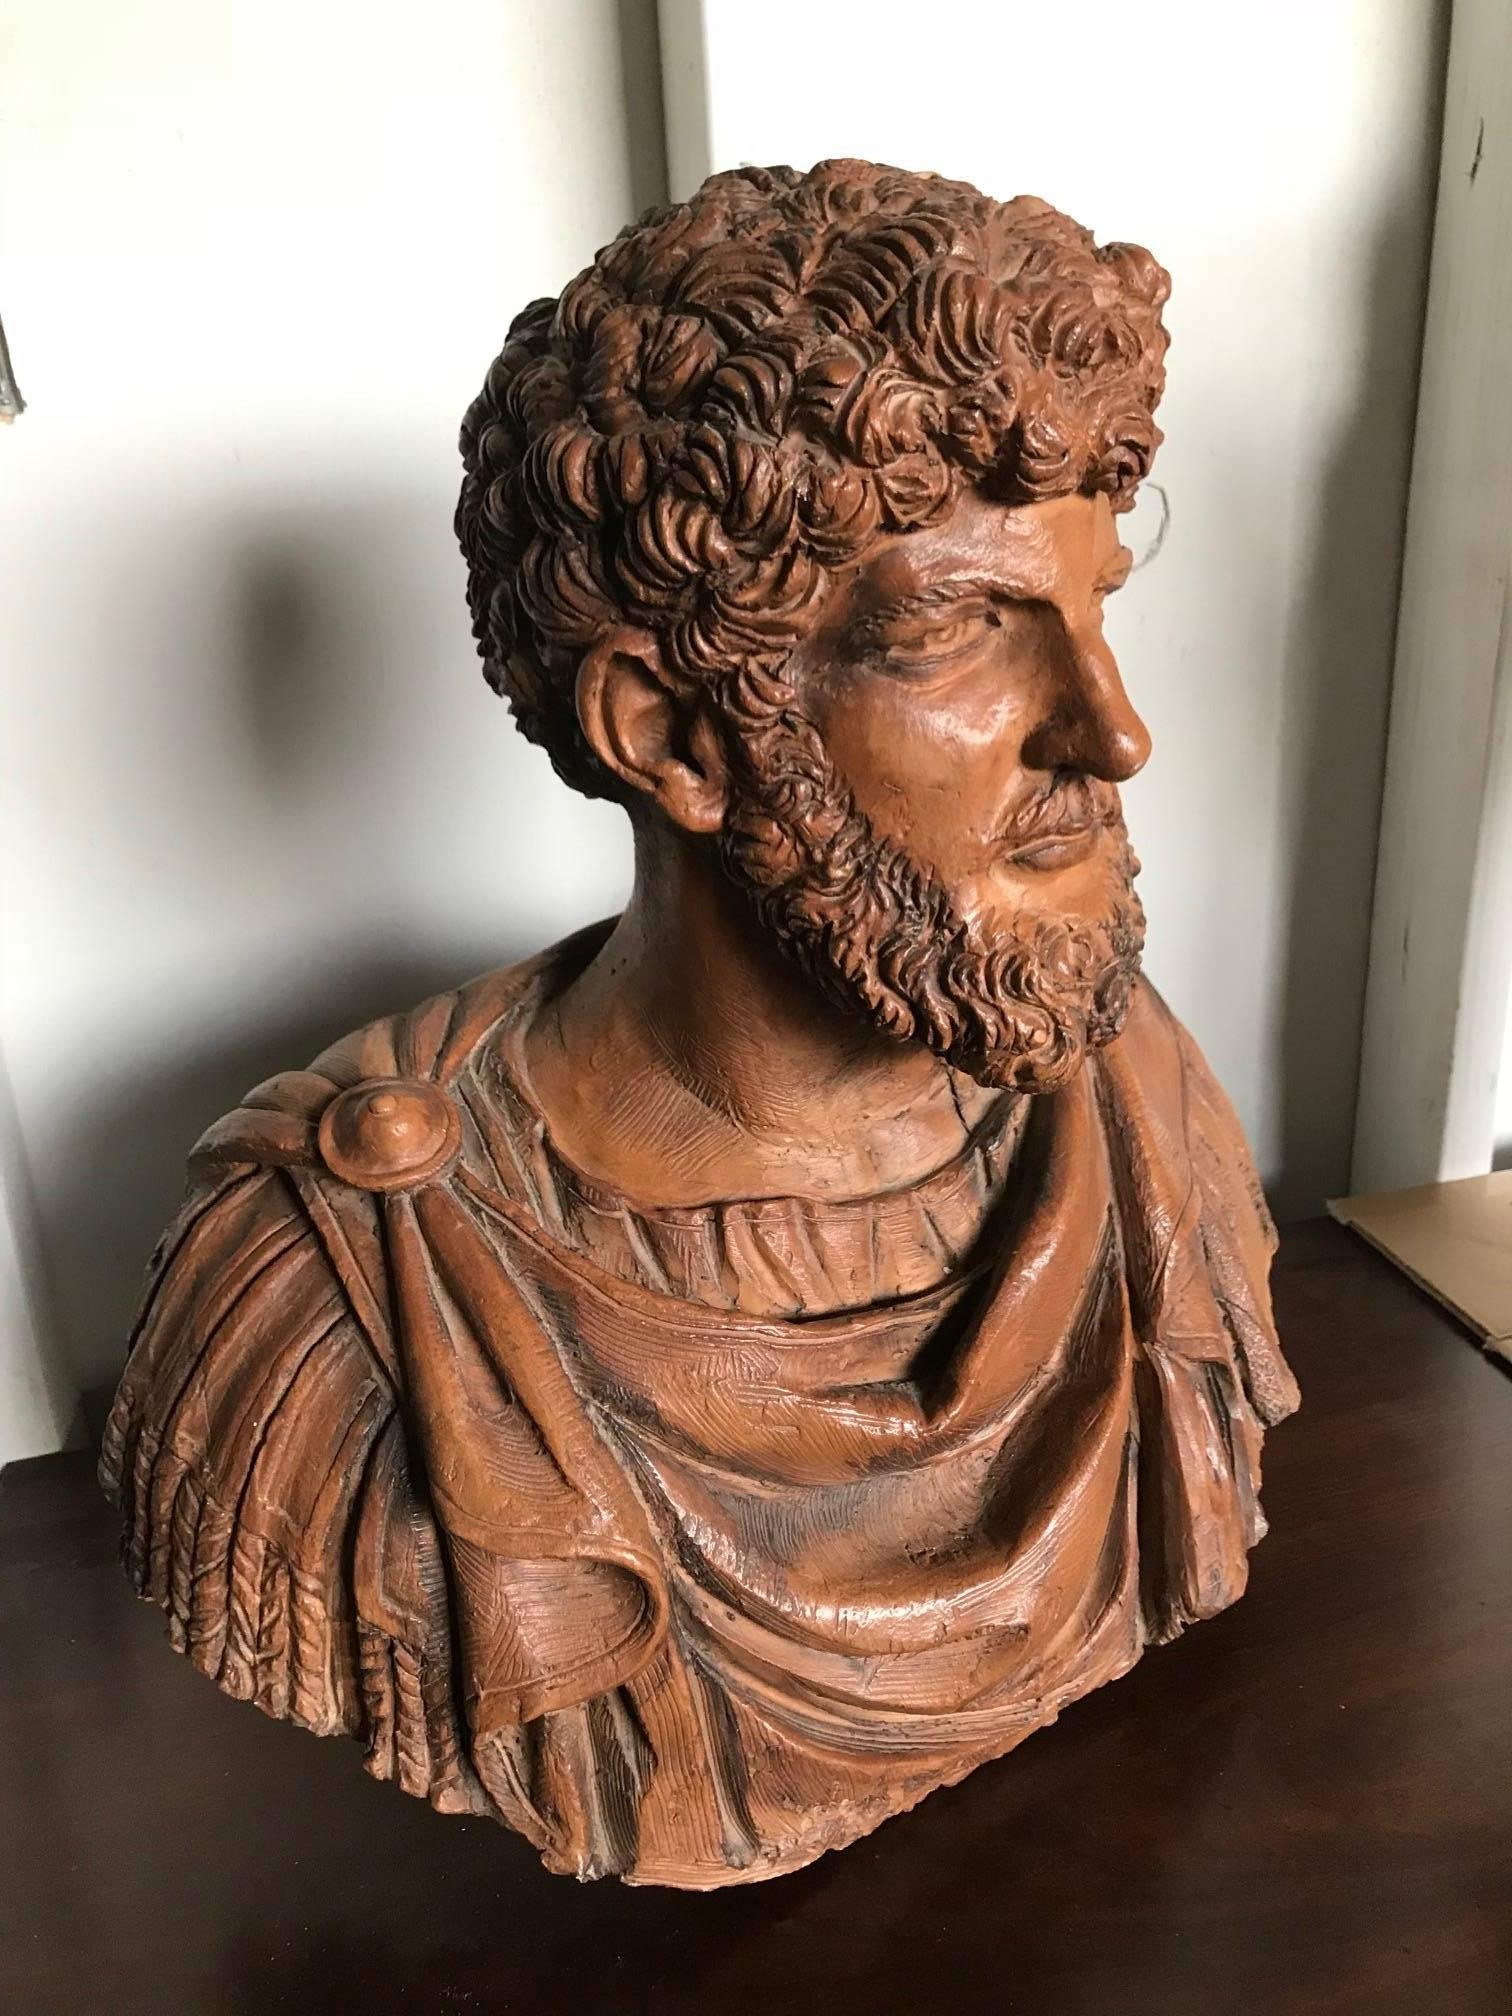 Superior quality 19th century antique Italian carved and sculpted terracotta bust of  Lucius Verus of magnificent detail and color with finely aged patina.

Circa 1880.

Lucius Verus (Latin: Lucius Aurelius Verus Augustus; 15 December 130 – 169) was